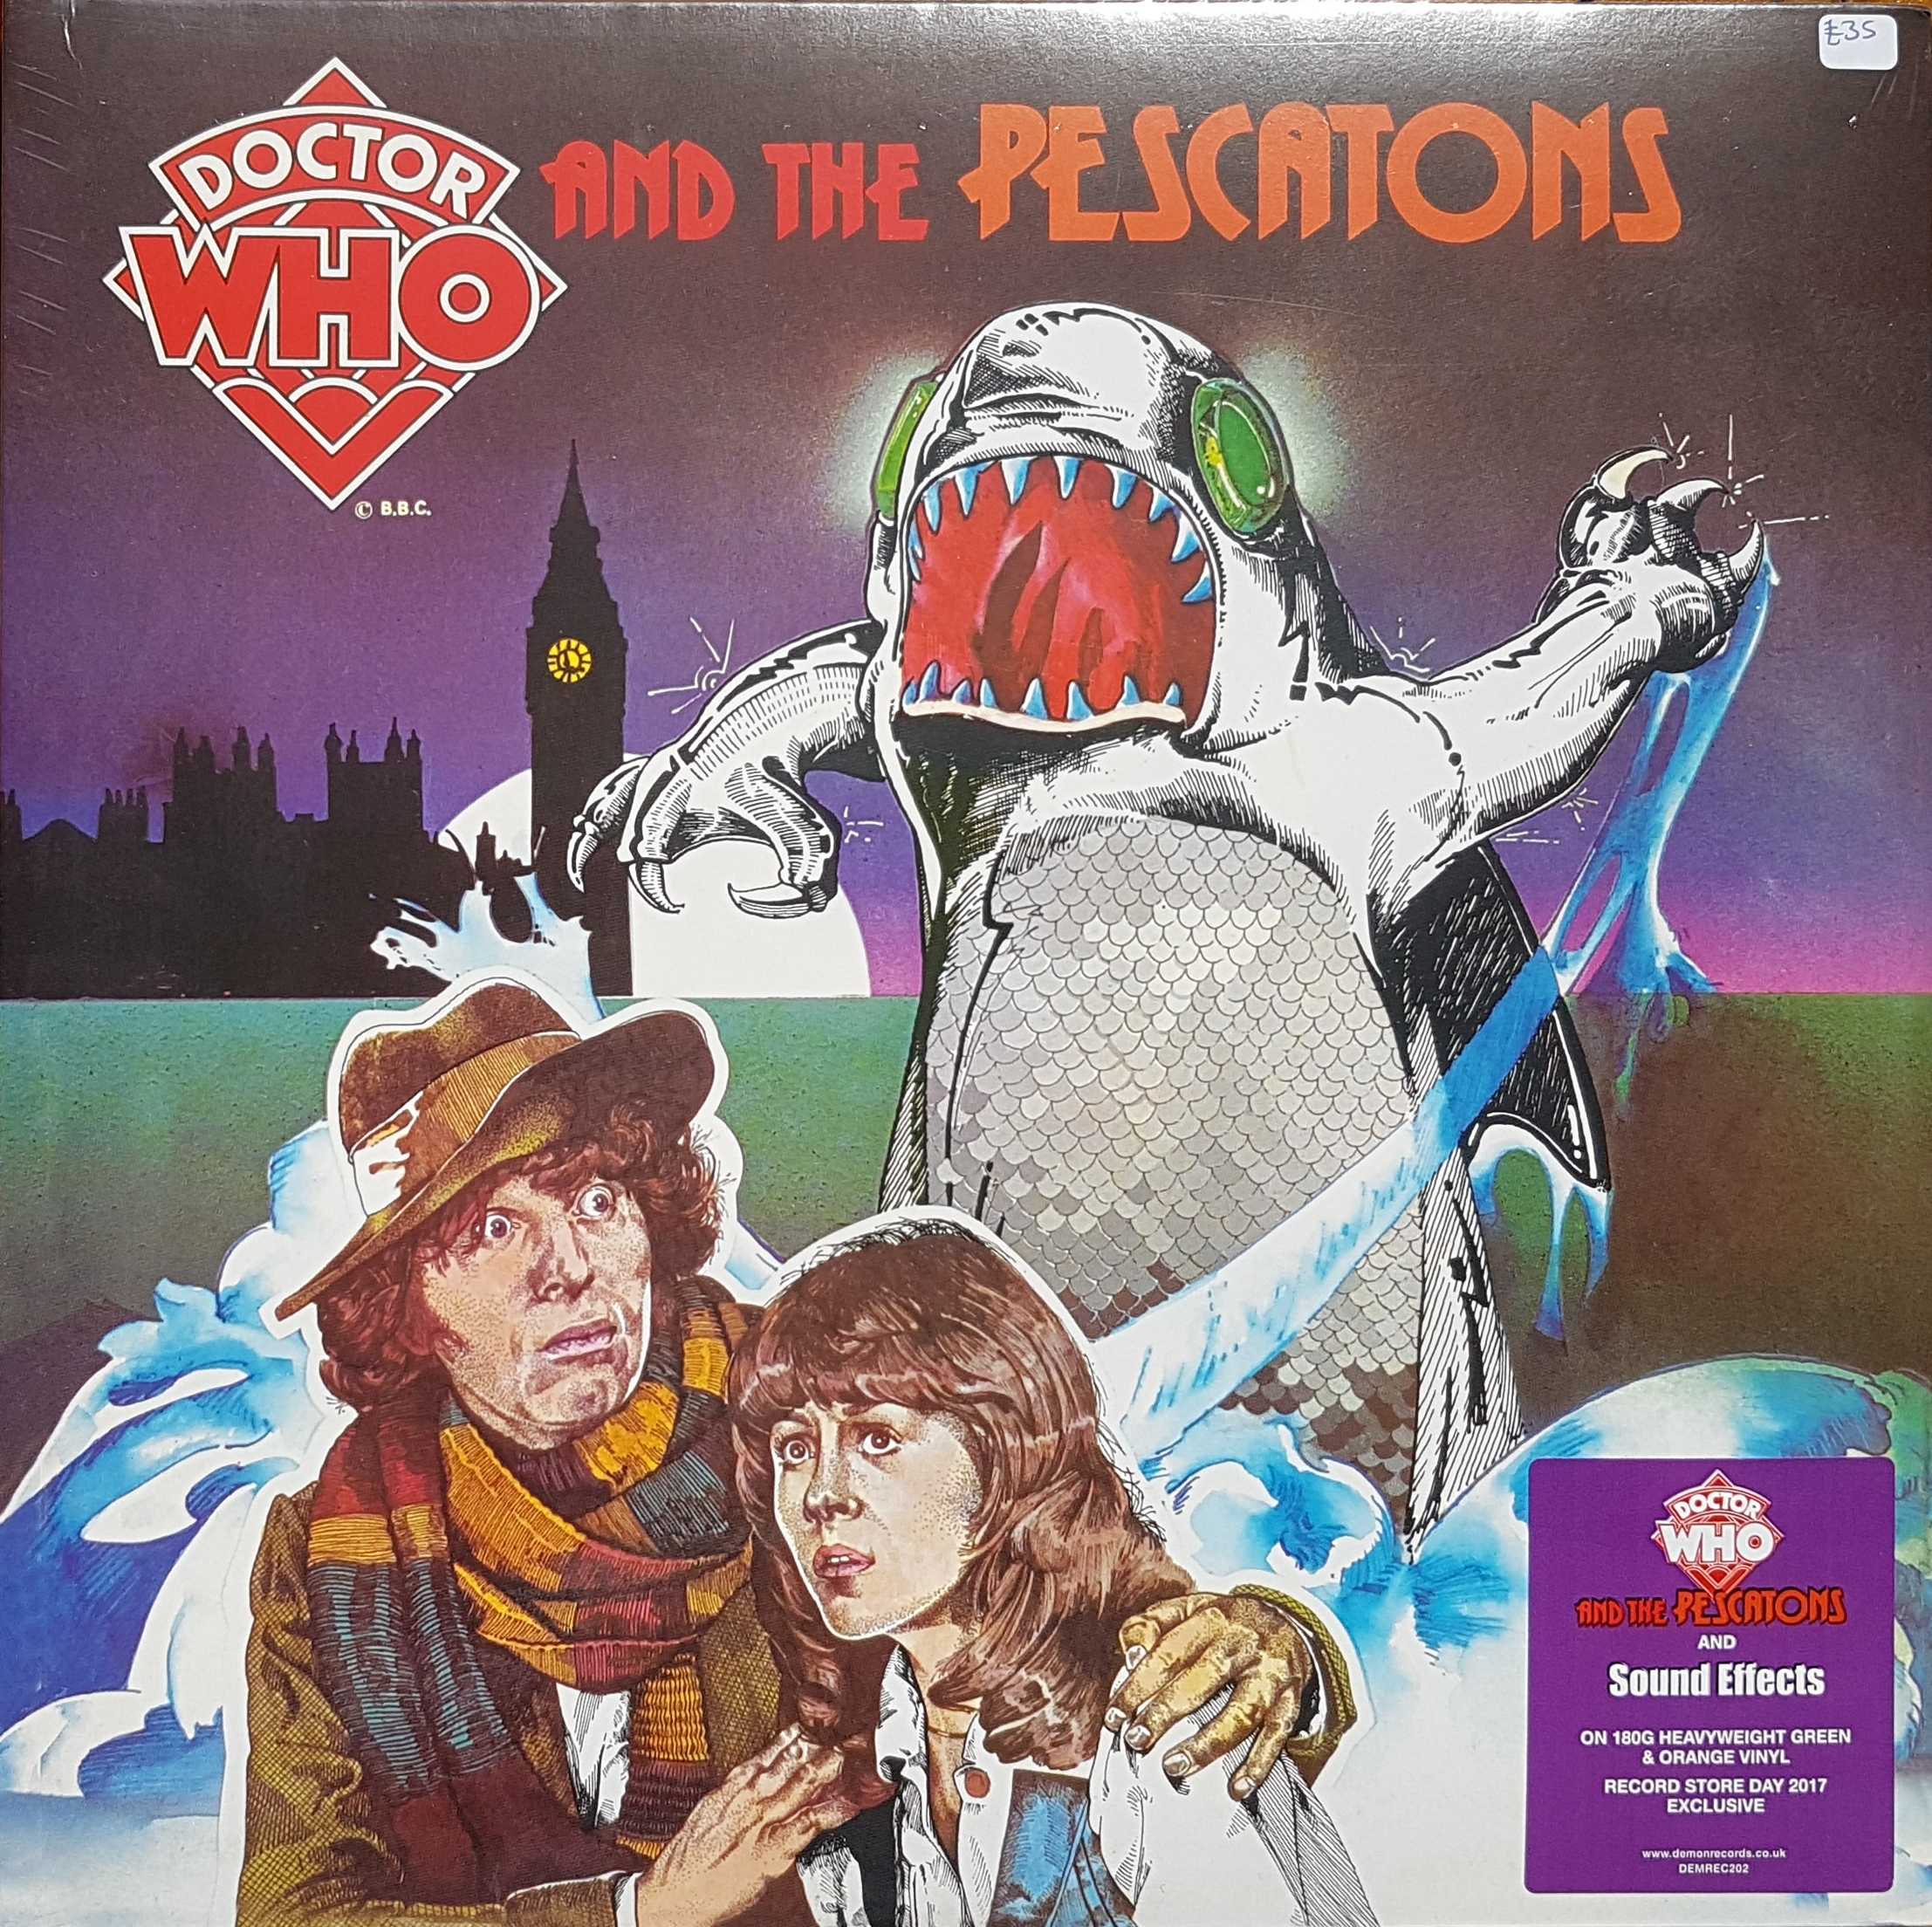 Picture of DEMREC 202 Doctor Who and the Pescatons and Sound Effects - Record Store Day 2017 by artist Various from the BBC records and Tapes library